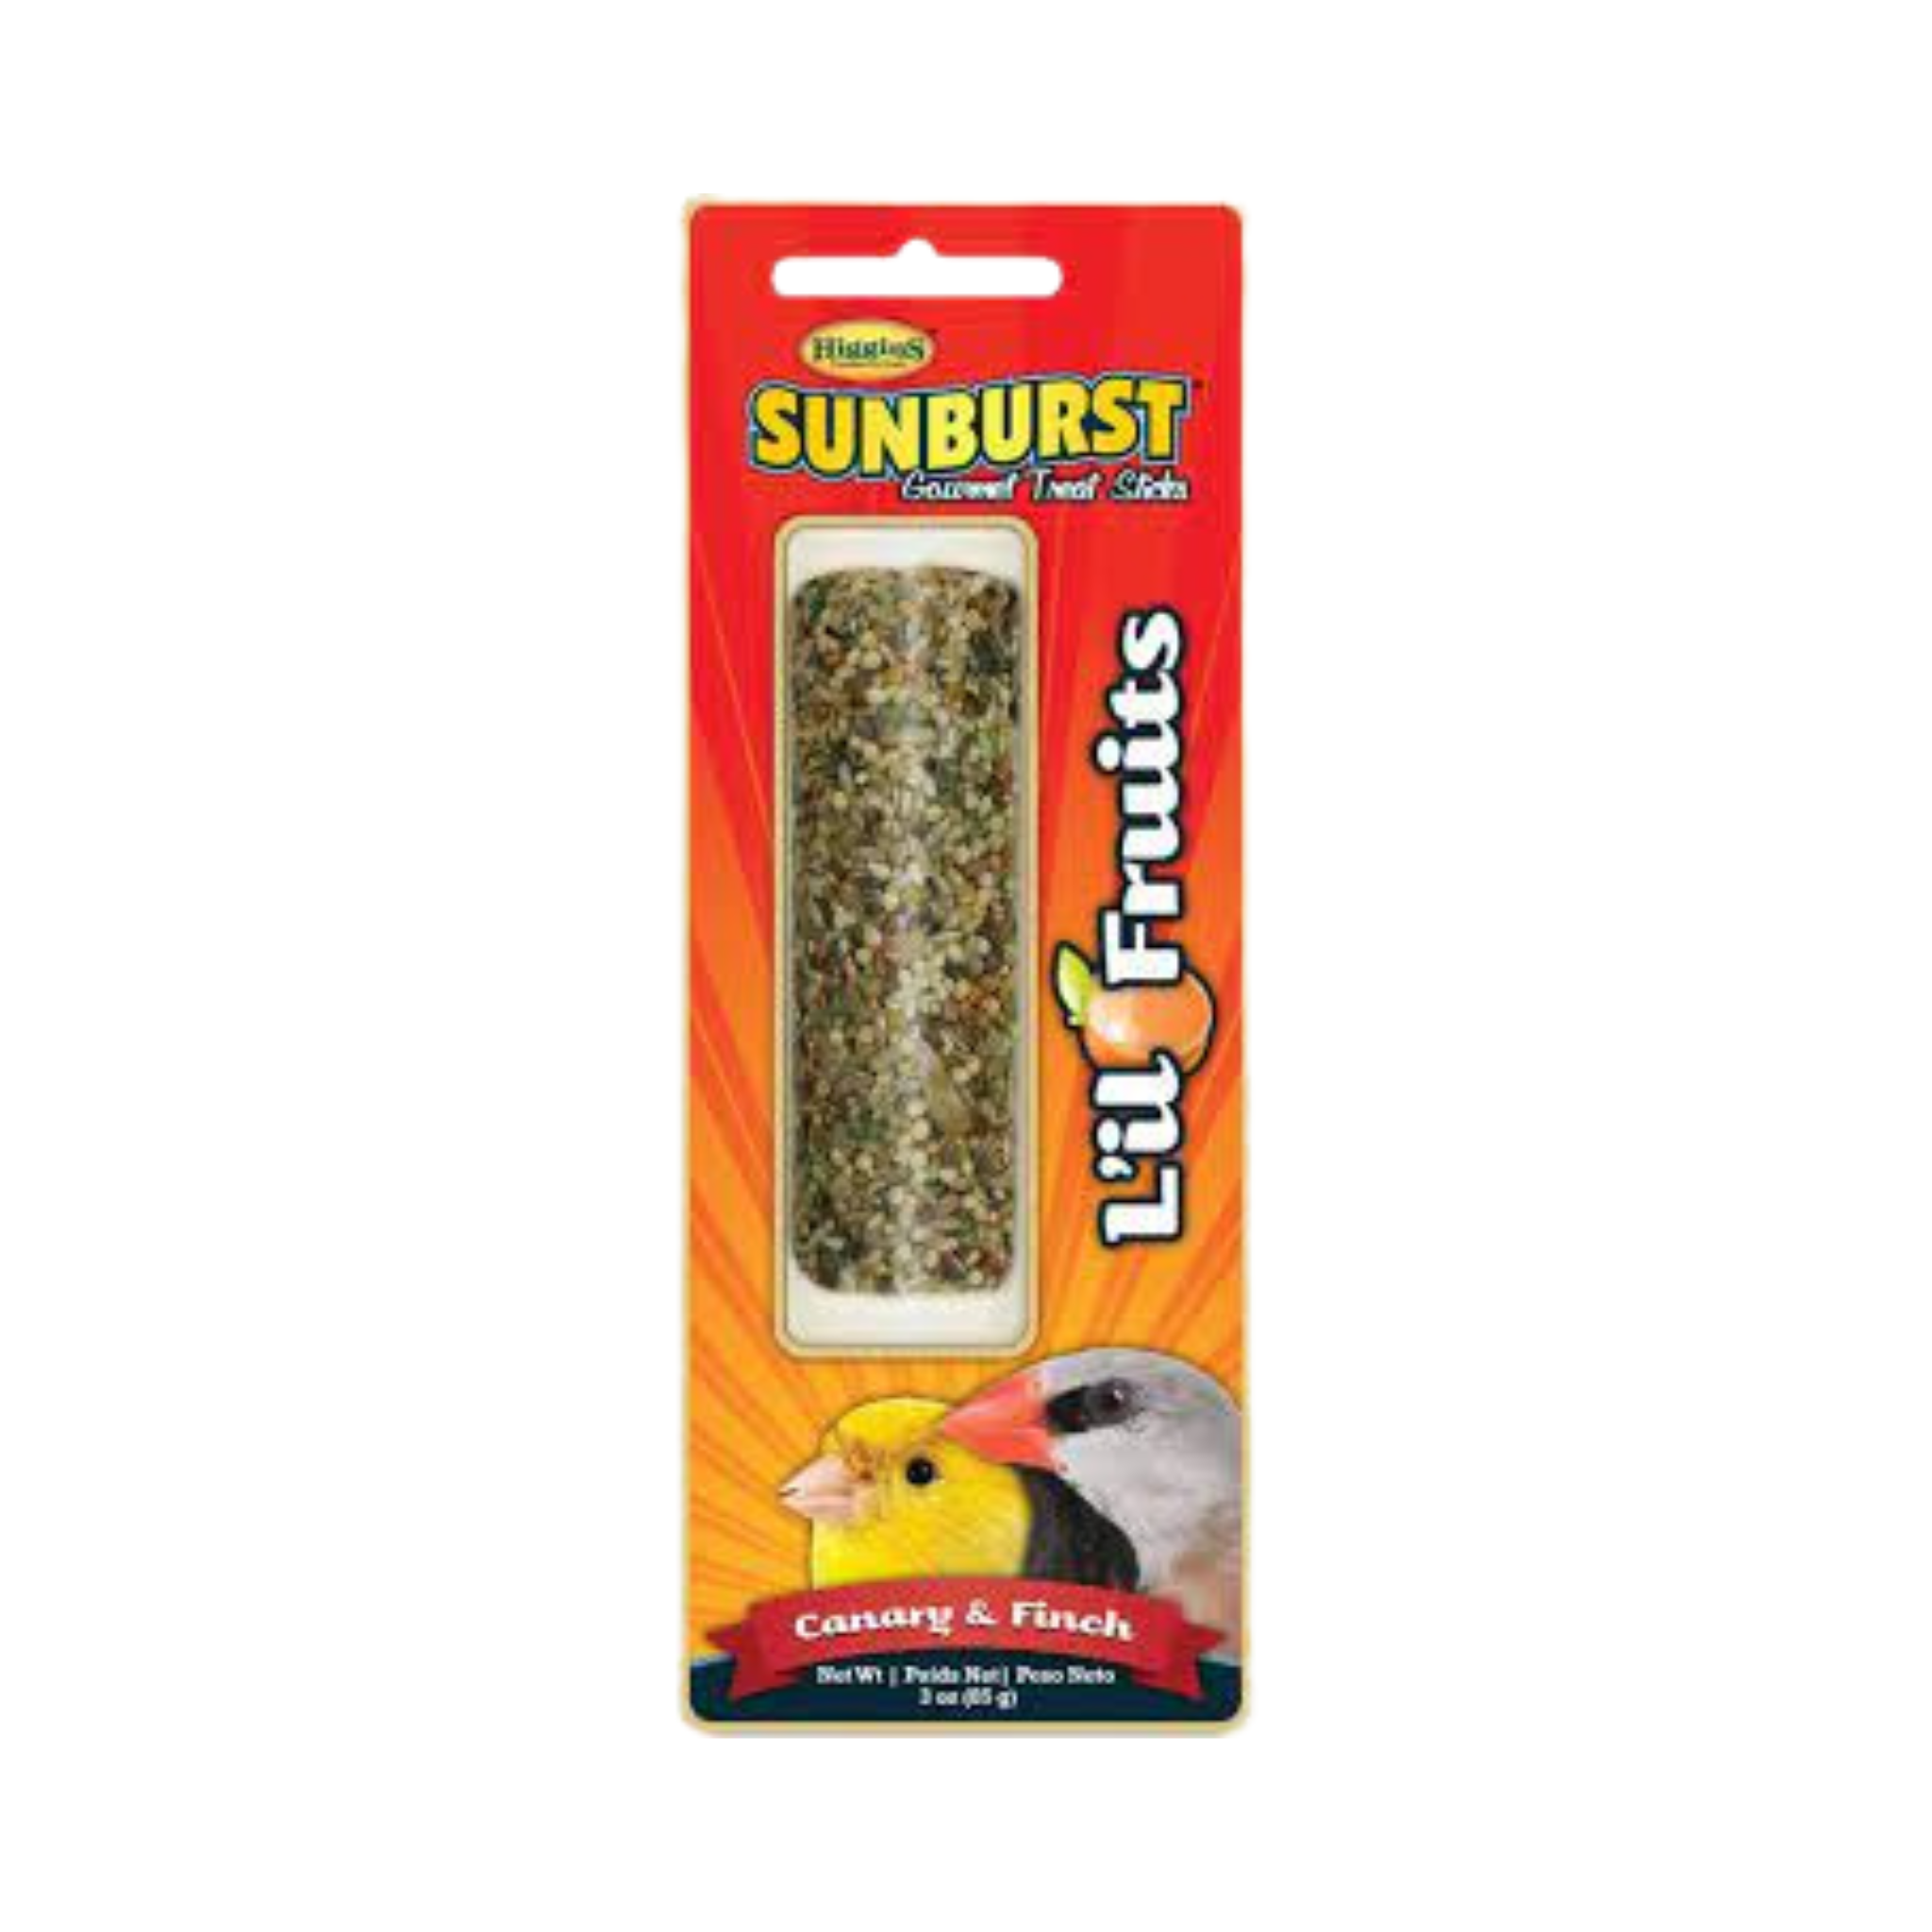 Higgins Sunburst L’il Fruits Stick For Canary and Finch